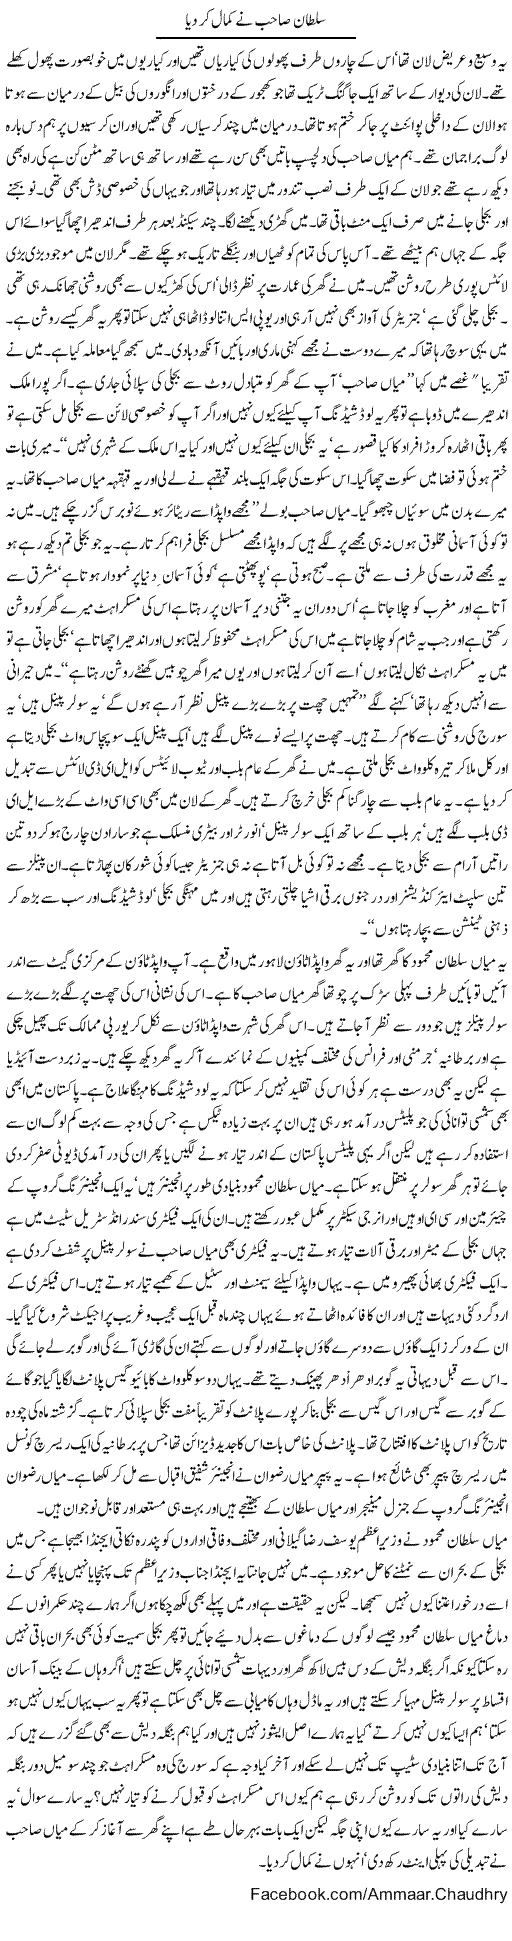 Sultan Sahab and Electricity Express Column Amad Chaudhry 6 May 2012